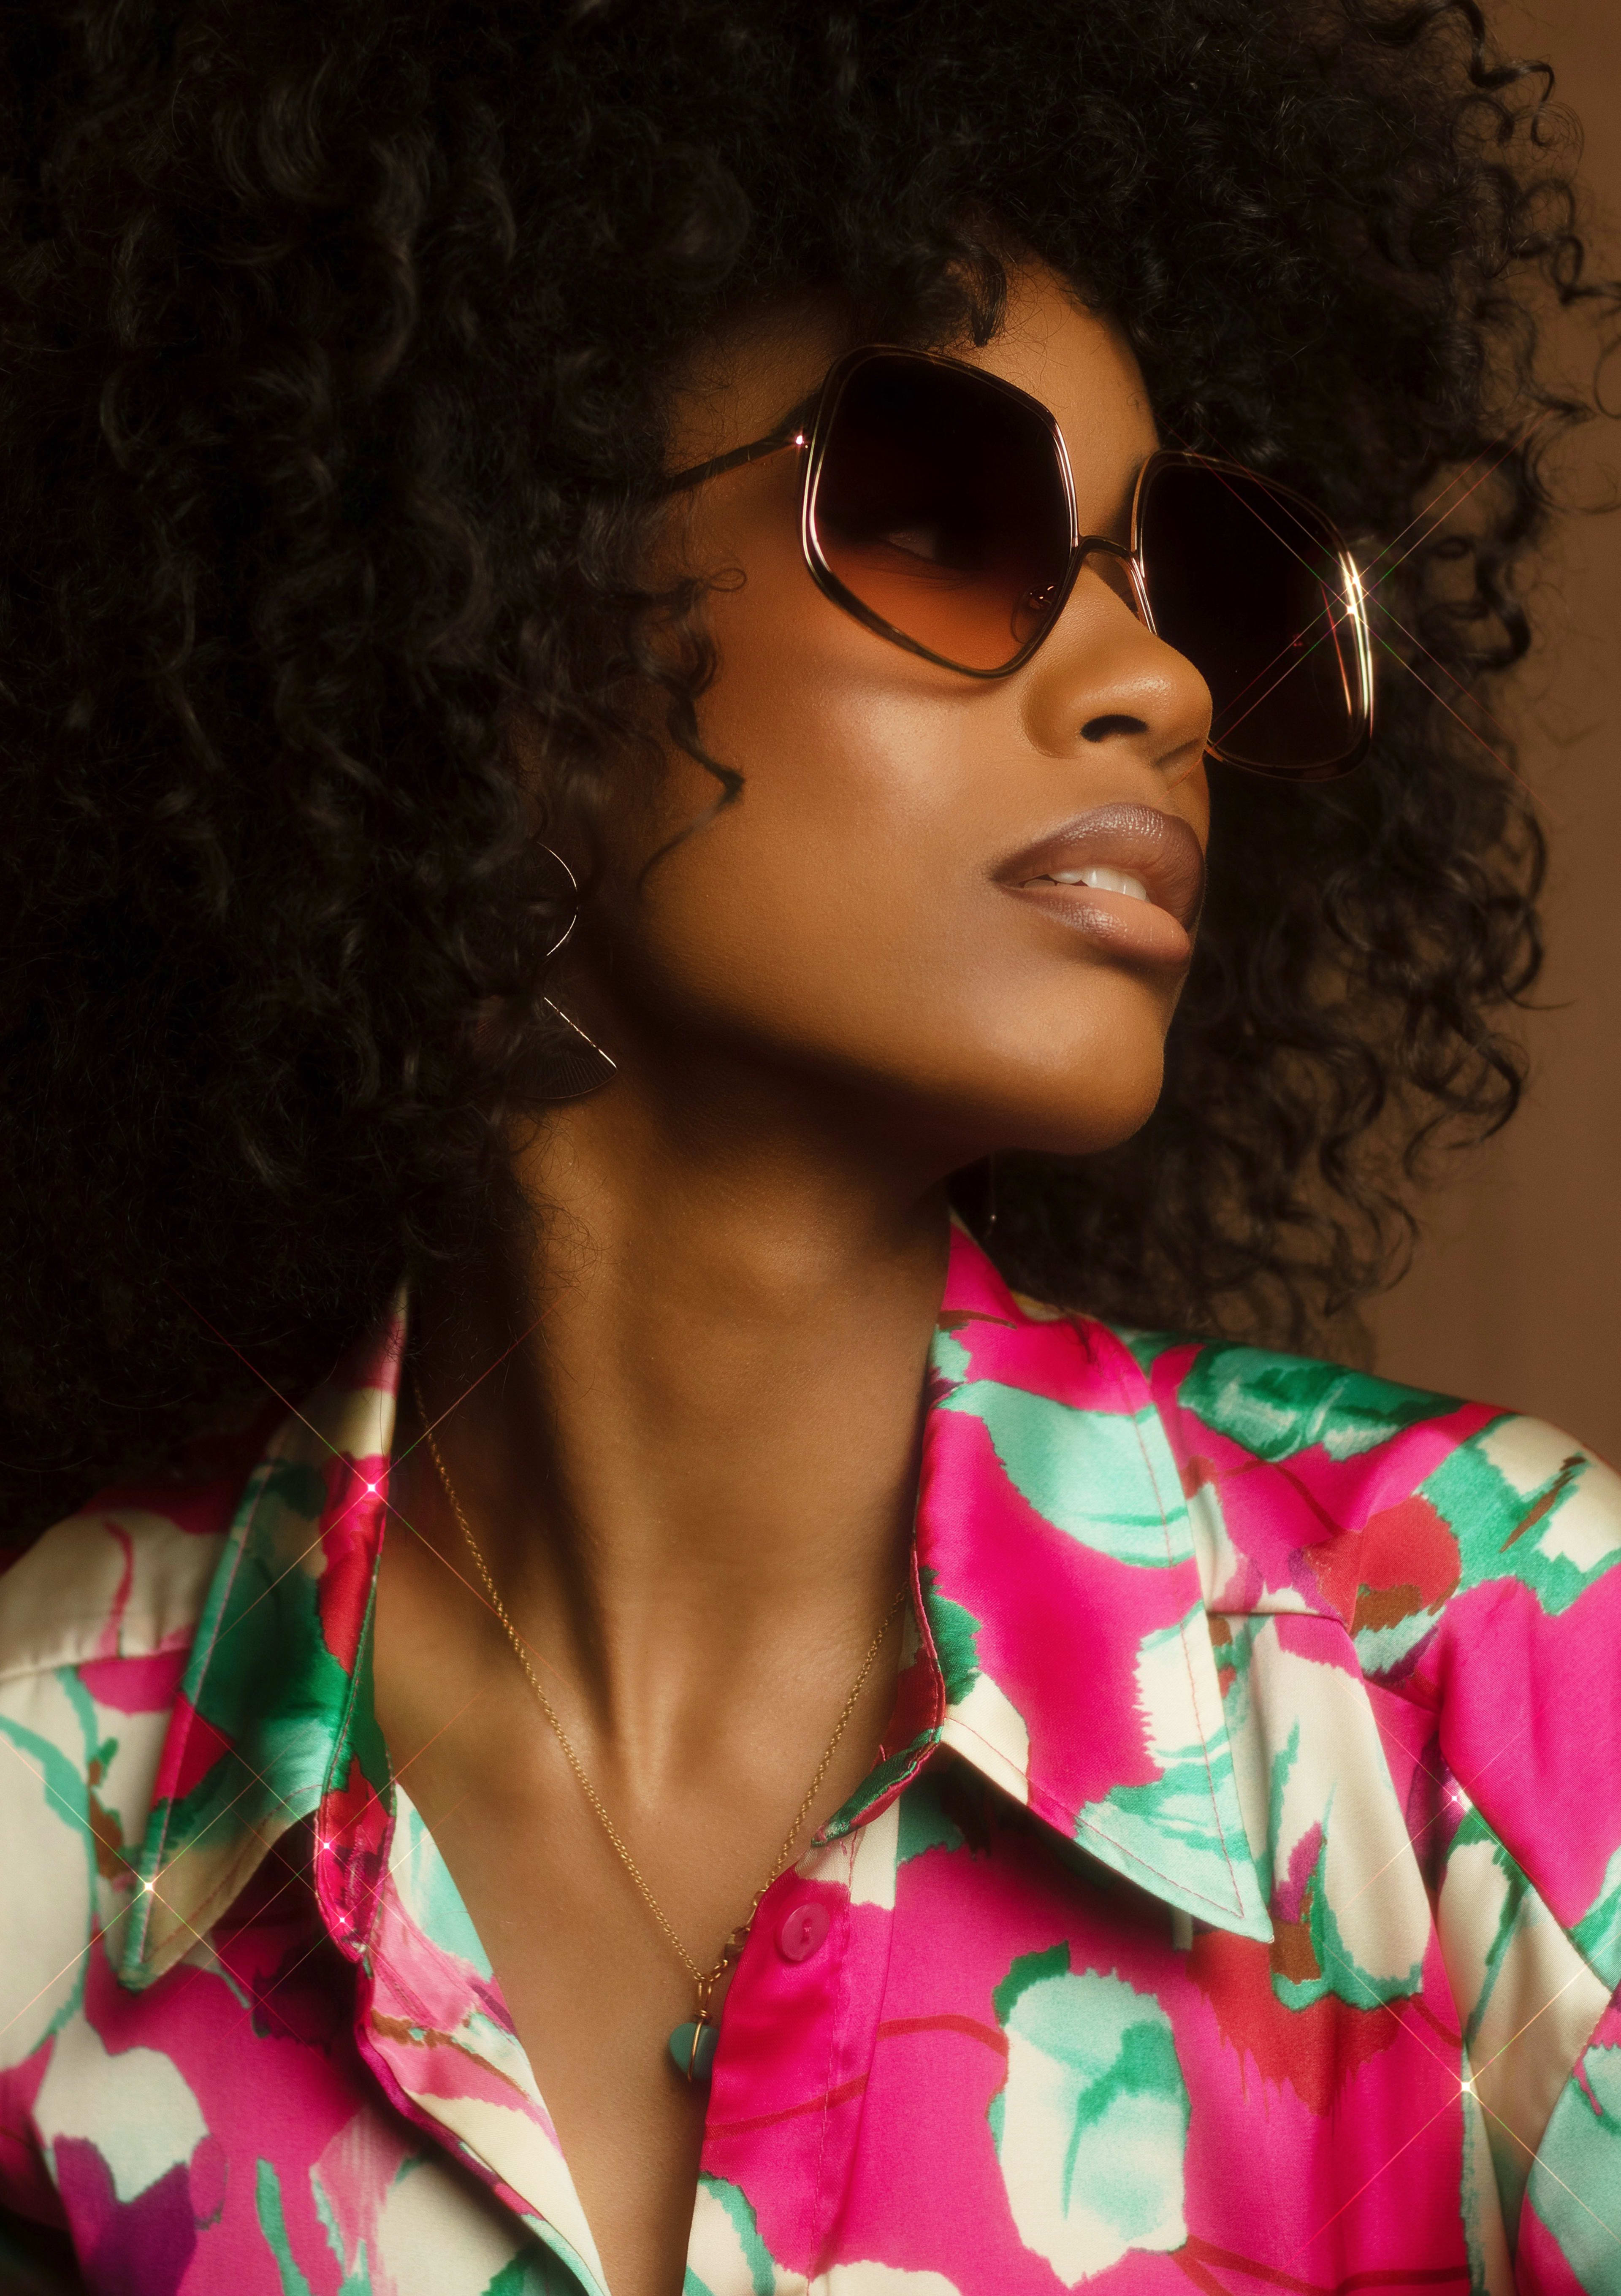 A photo shoot of a person in a pink and green-collared shirt wearing sunglasses.